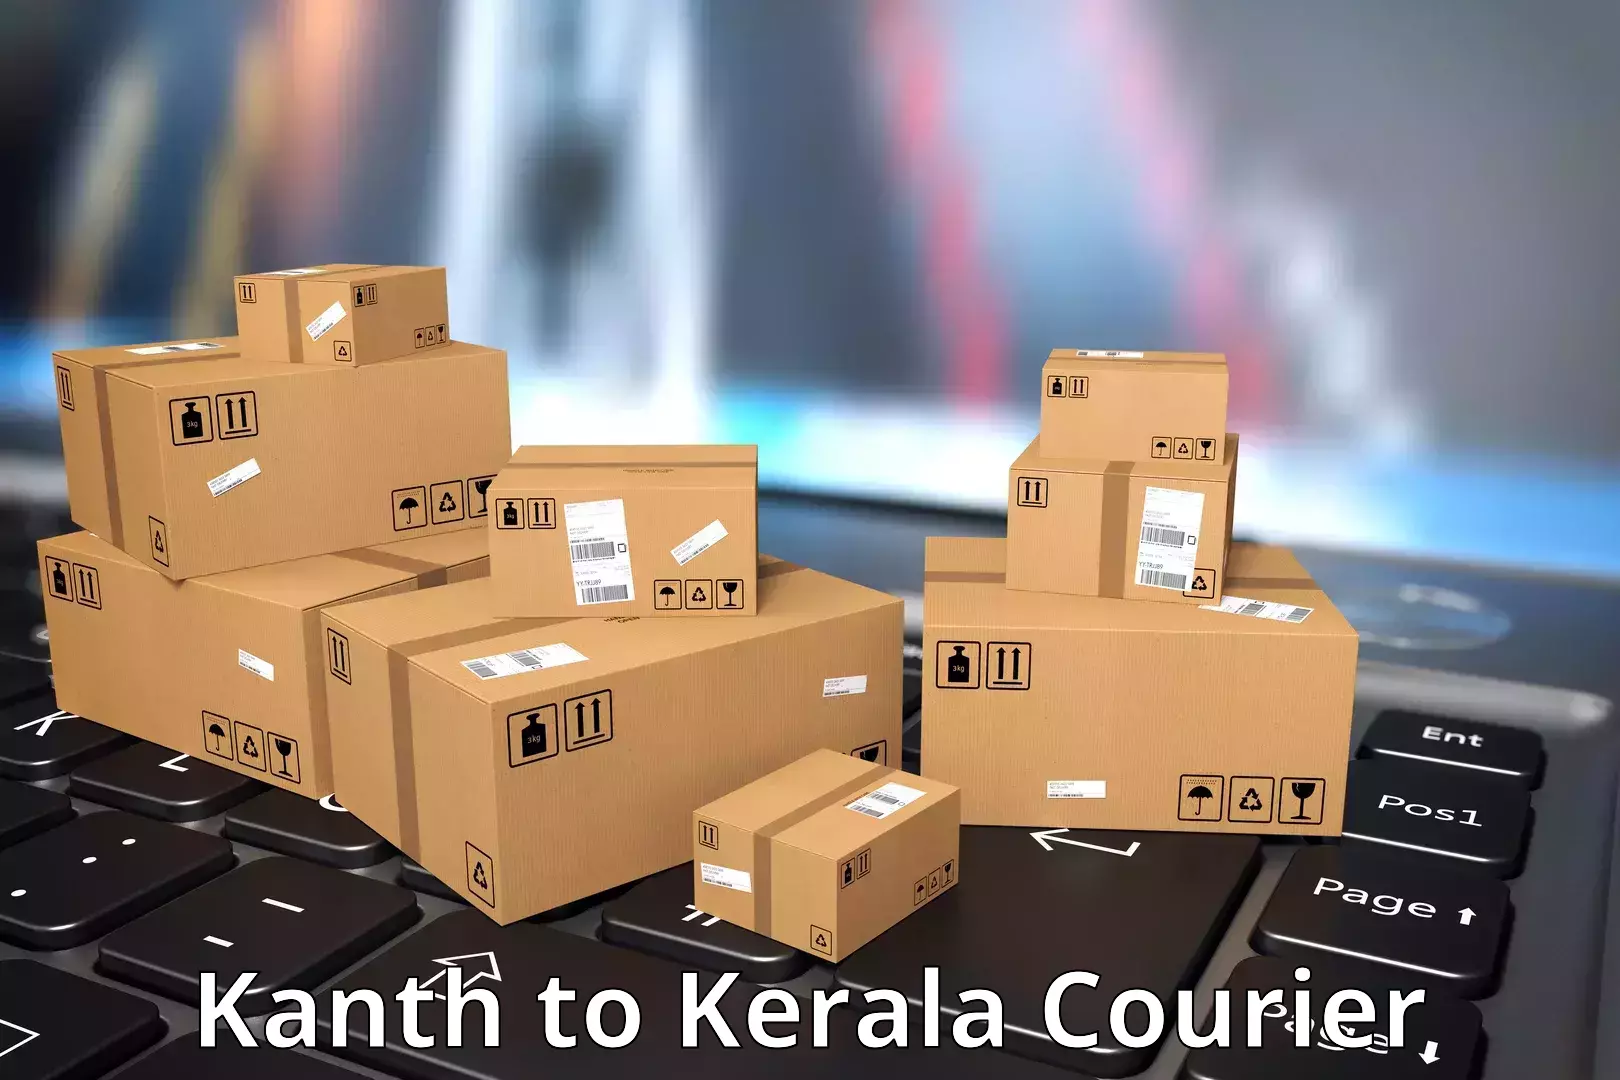 Customer-focused courier Kanth to Kottayam